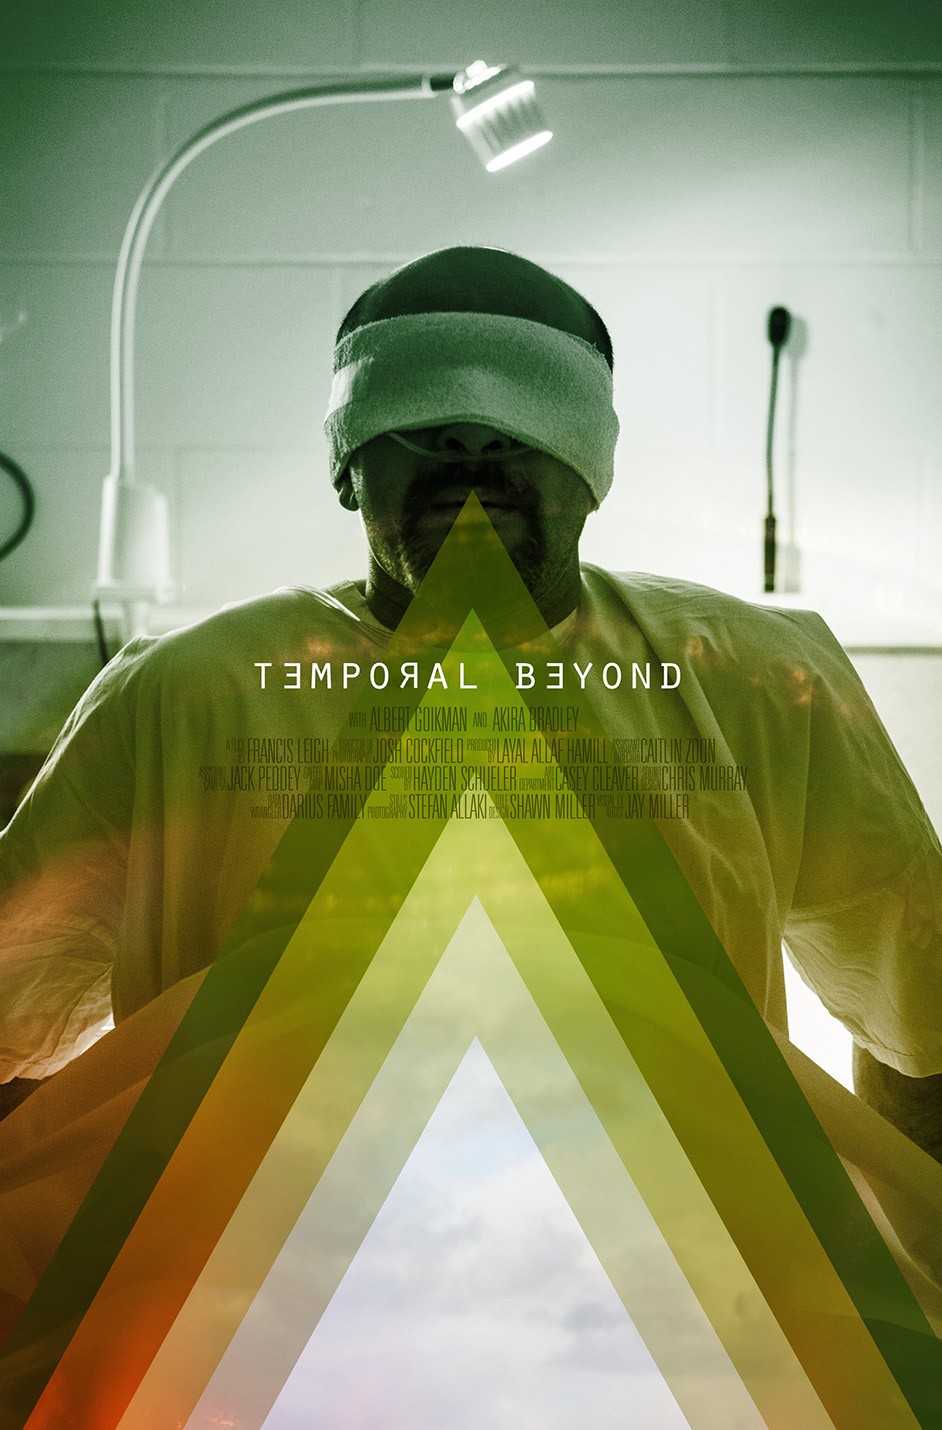 Extra Large Movie Poster Image for Temporal Beyond